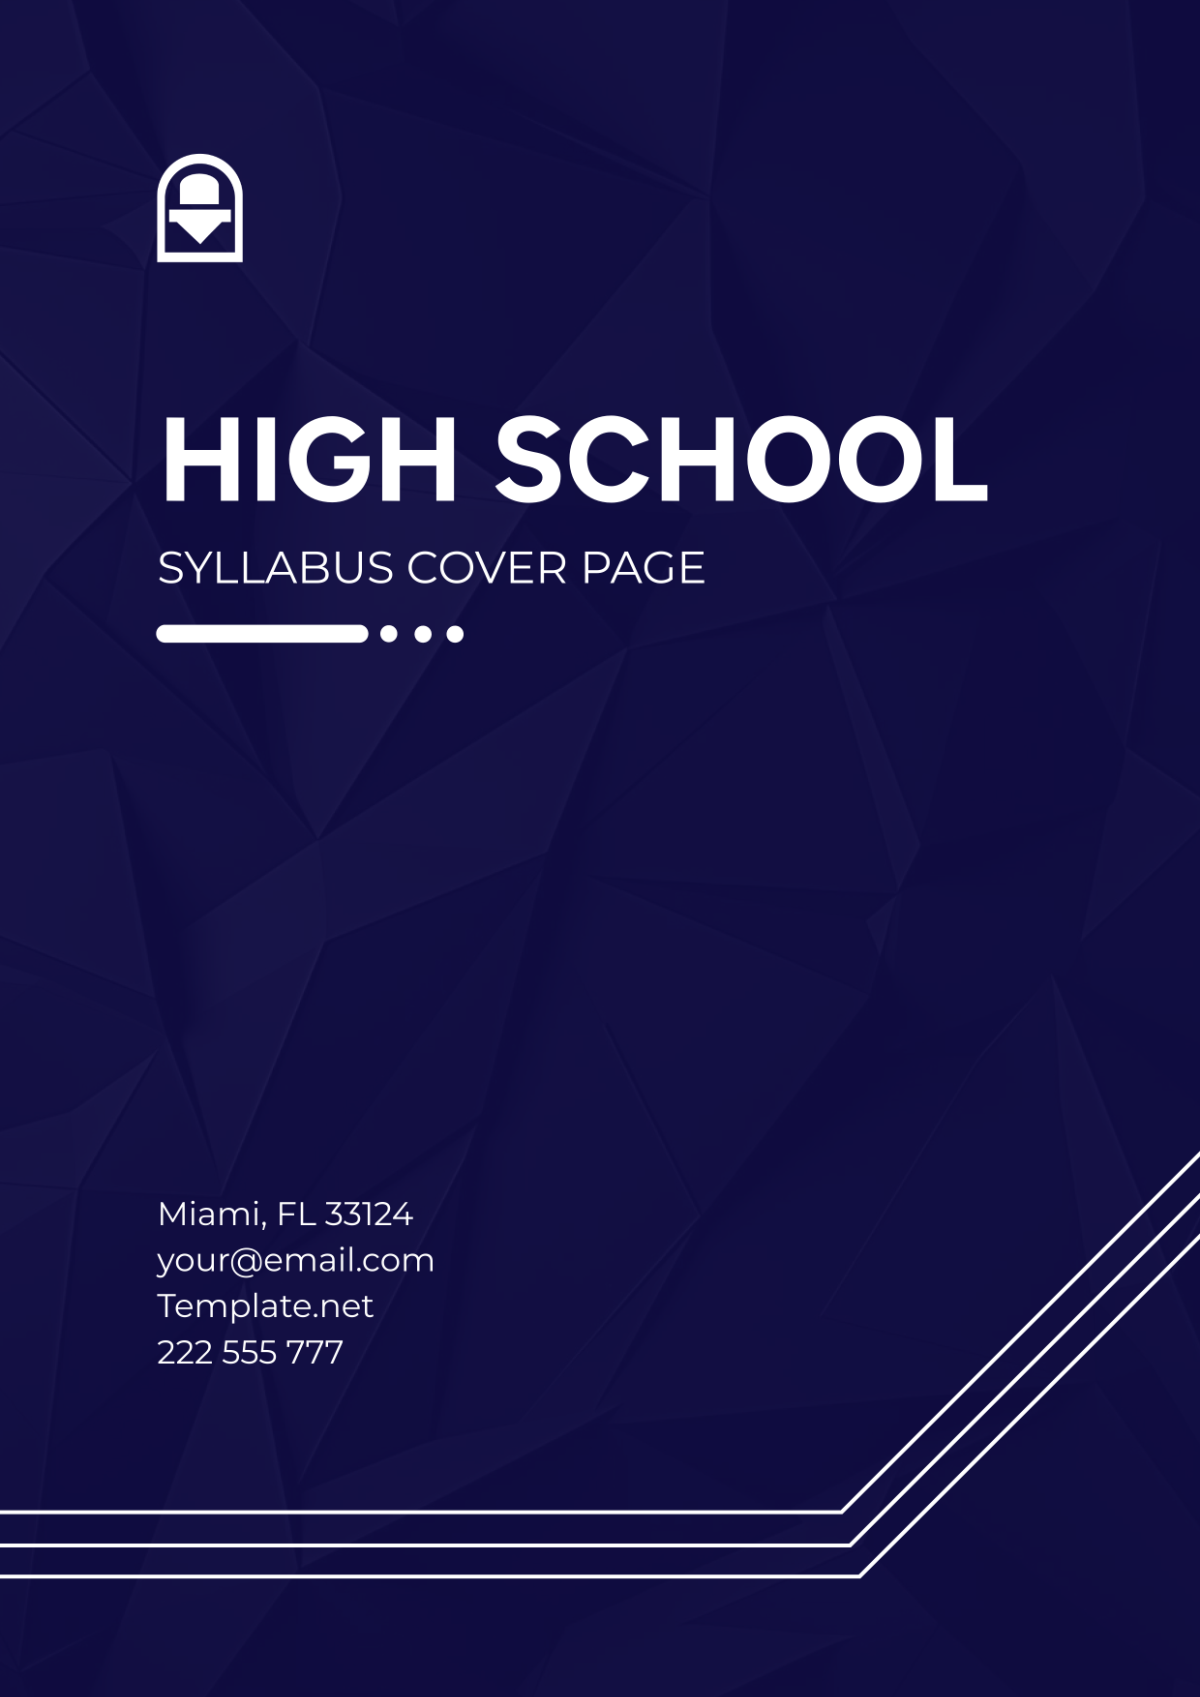 High School Syllabus Cover Page